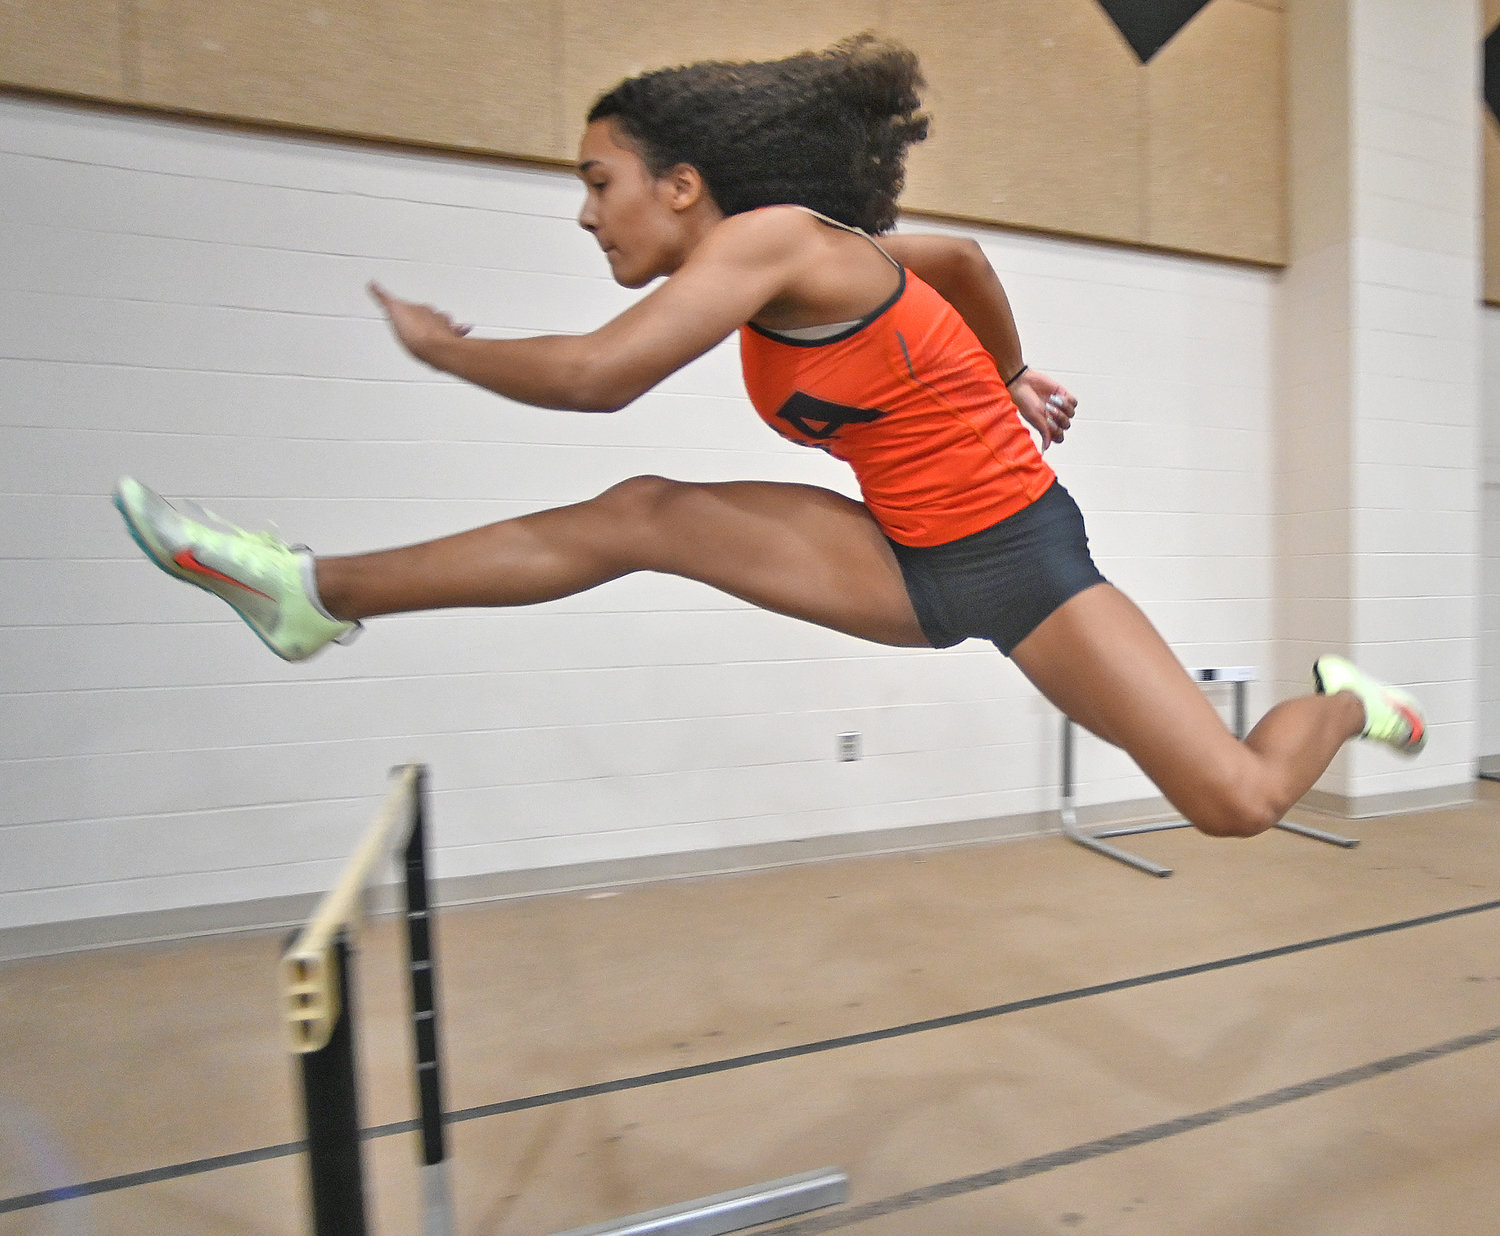 PRACTICE HURDLE — Rome Free Academy sophomore Imani Pugh practices the 55-meter hurdles at the RFA indoor track on Thursday afternoon. Pugh is competing in the 55 hurdles and the long jump today at the Ocean Breeze Athletic Complex on State Island